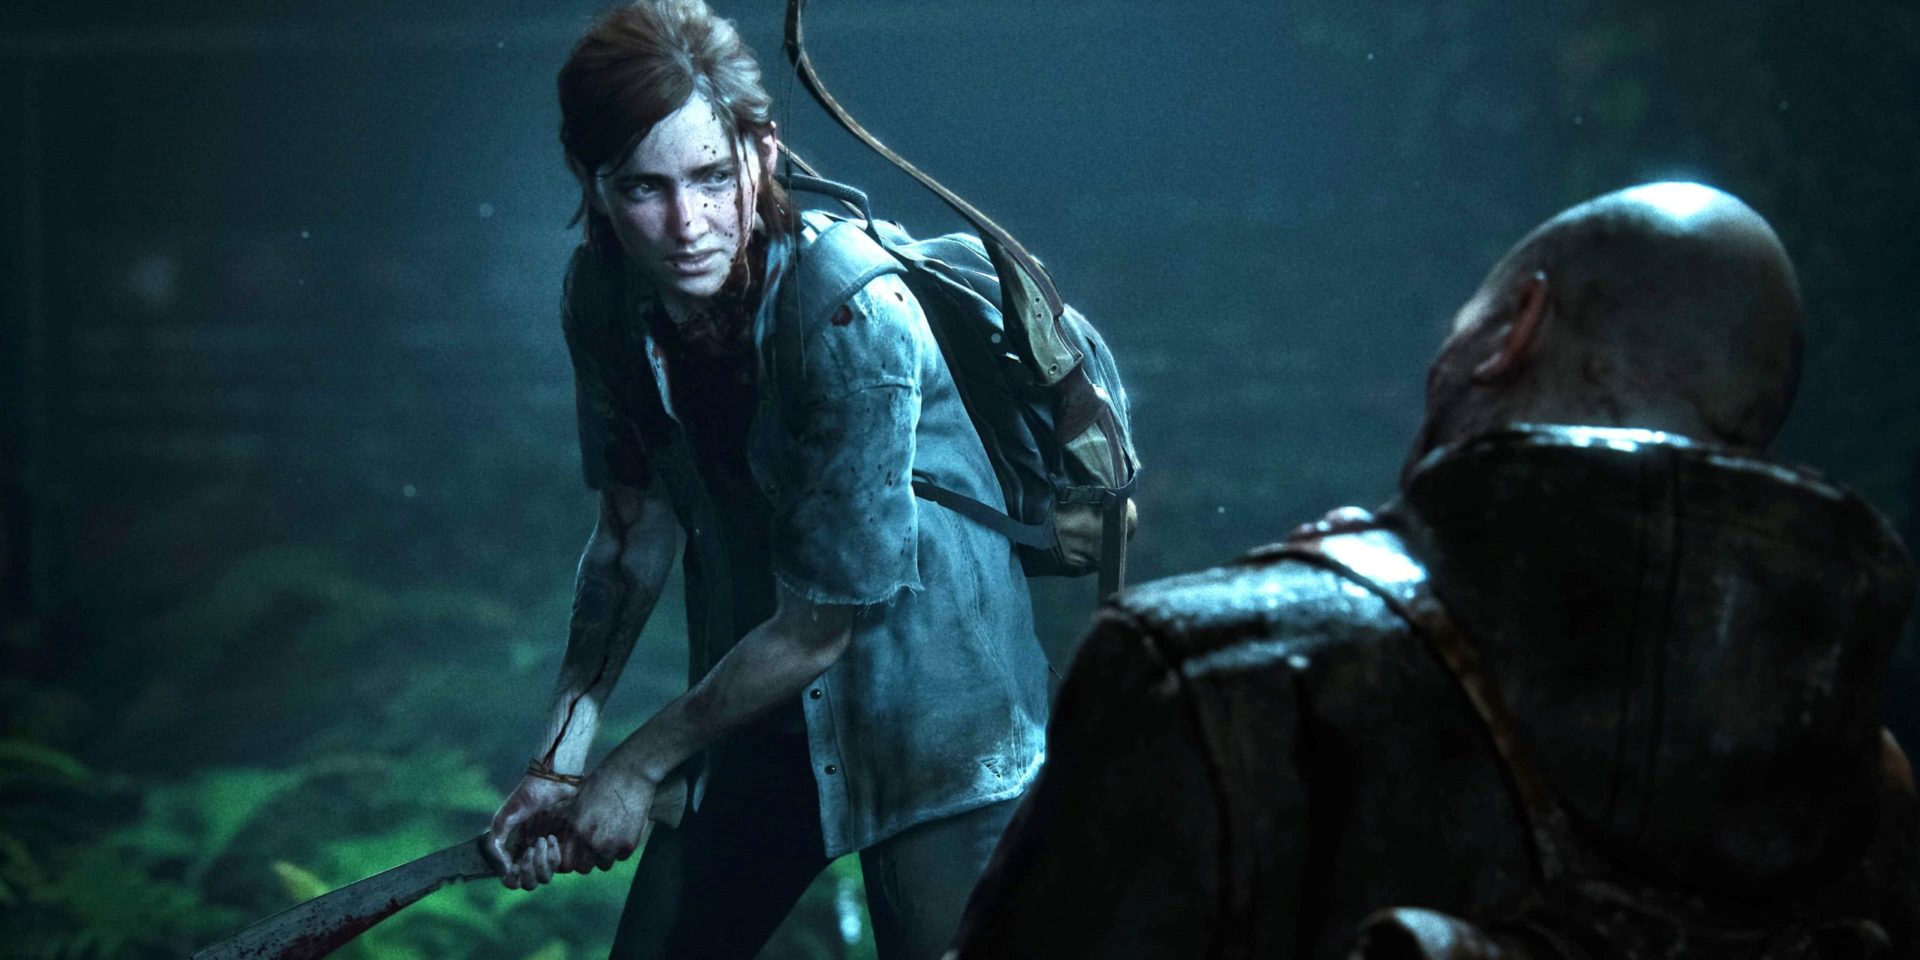 the last of us 2 on ps5